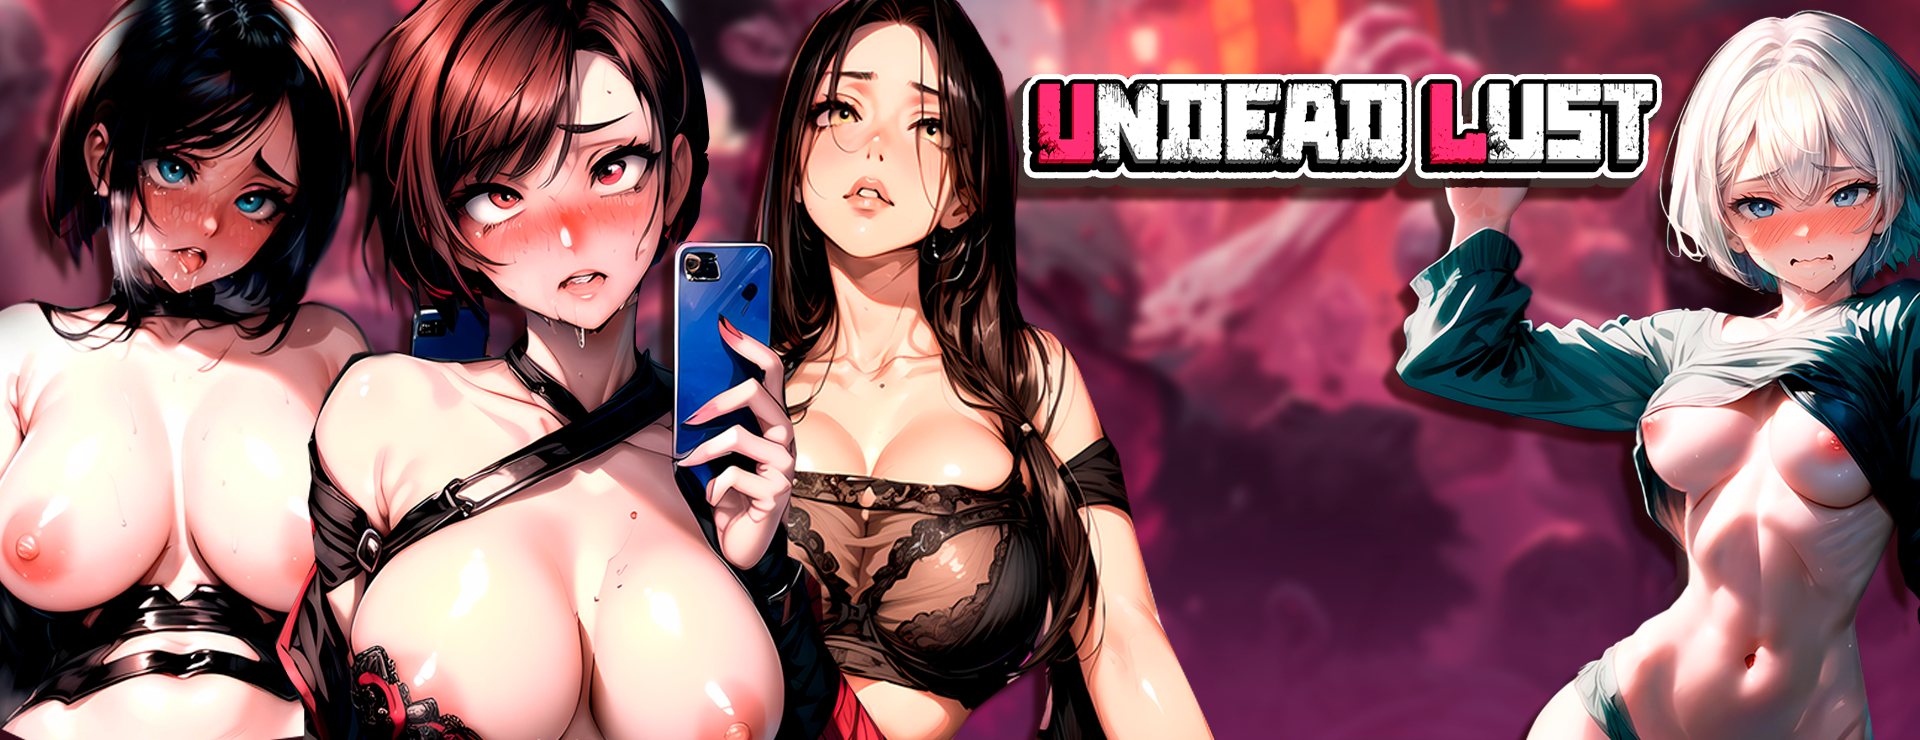 Undead Lust - Idle Juego